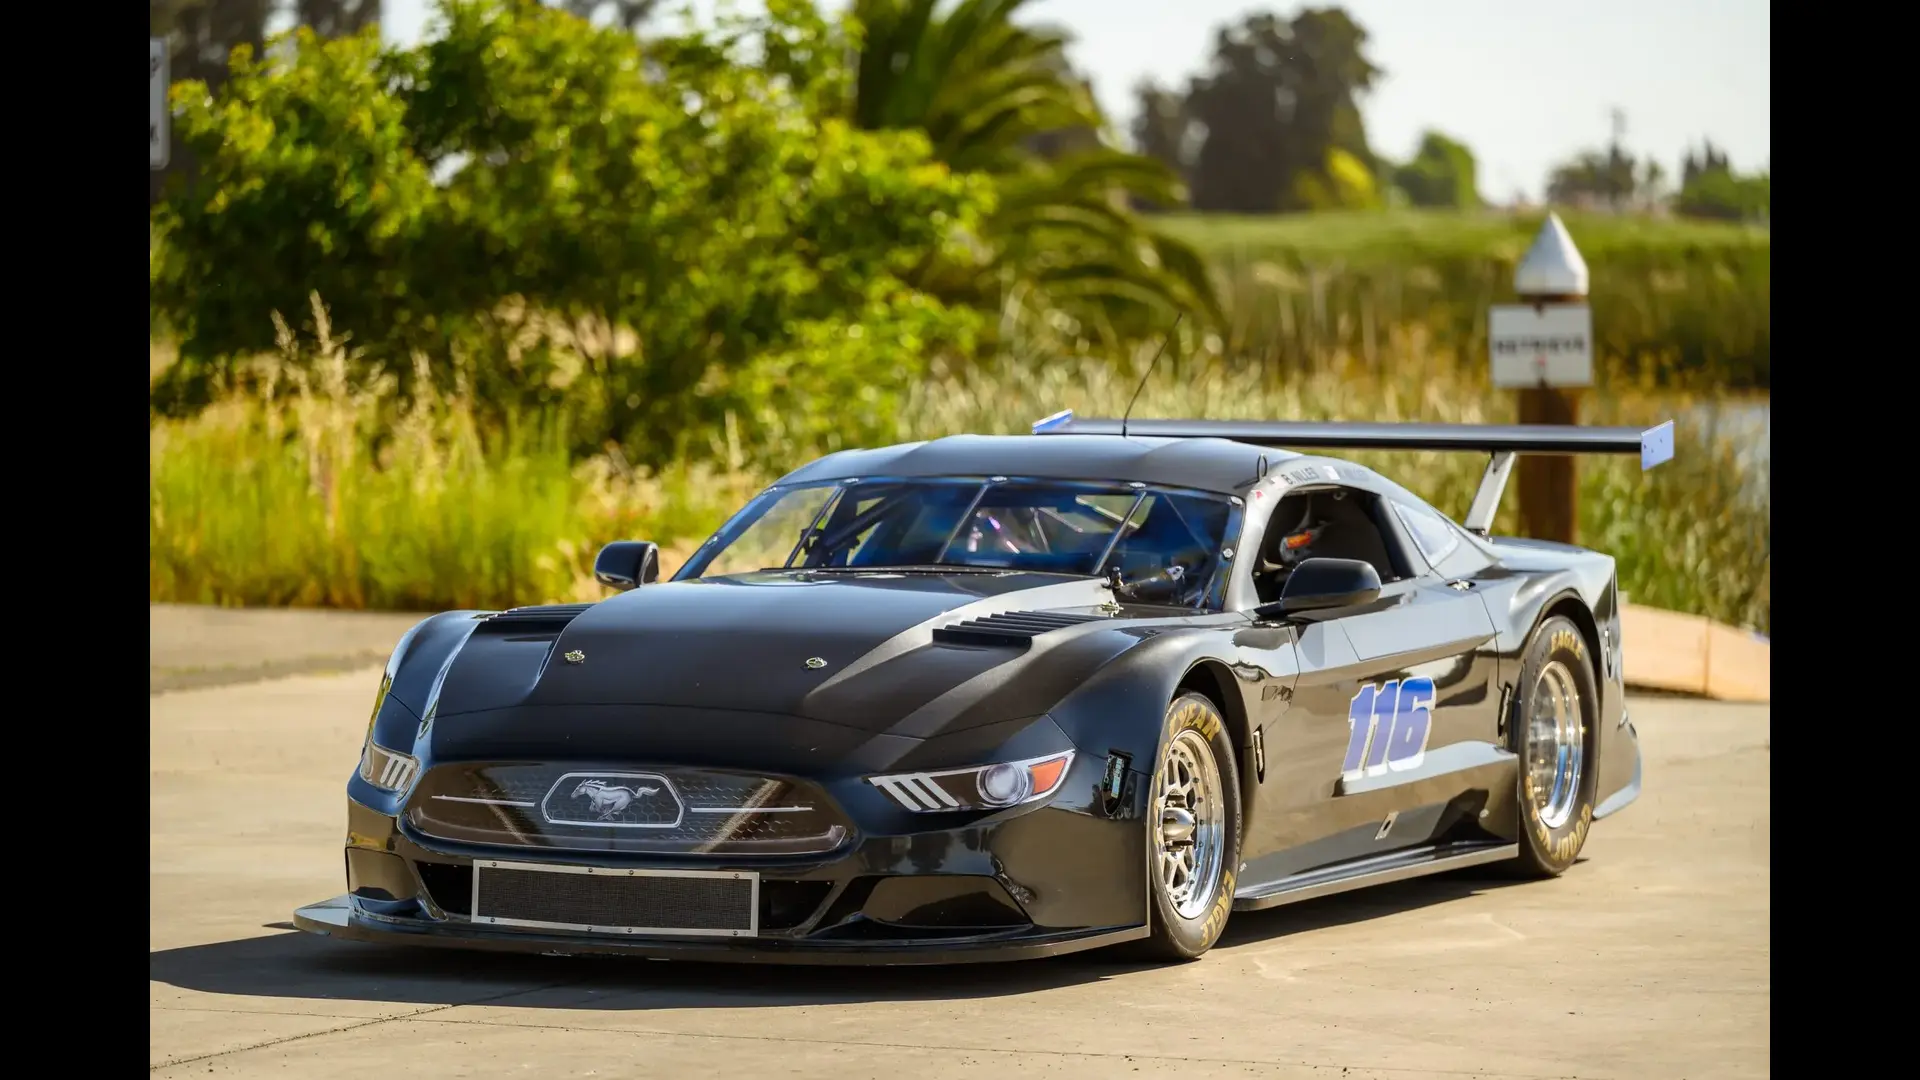 Ford Mustang Trans Am Race Car Built for VP Racing Fuels Founder